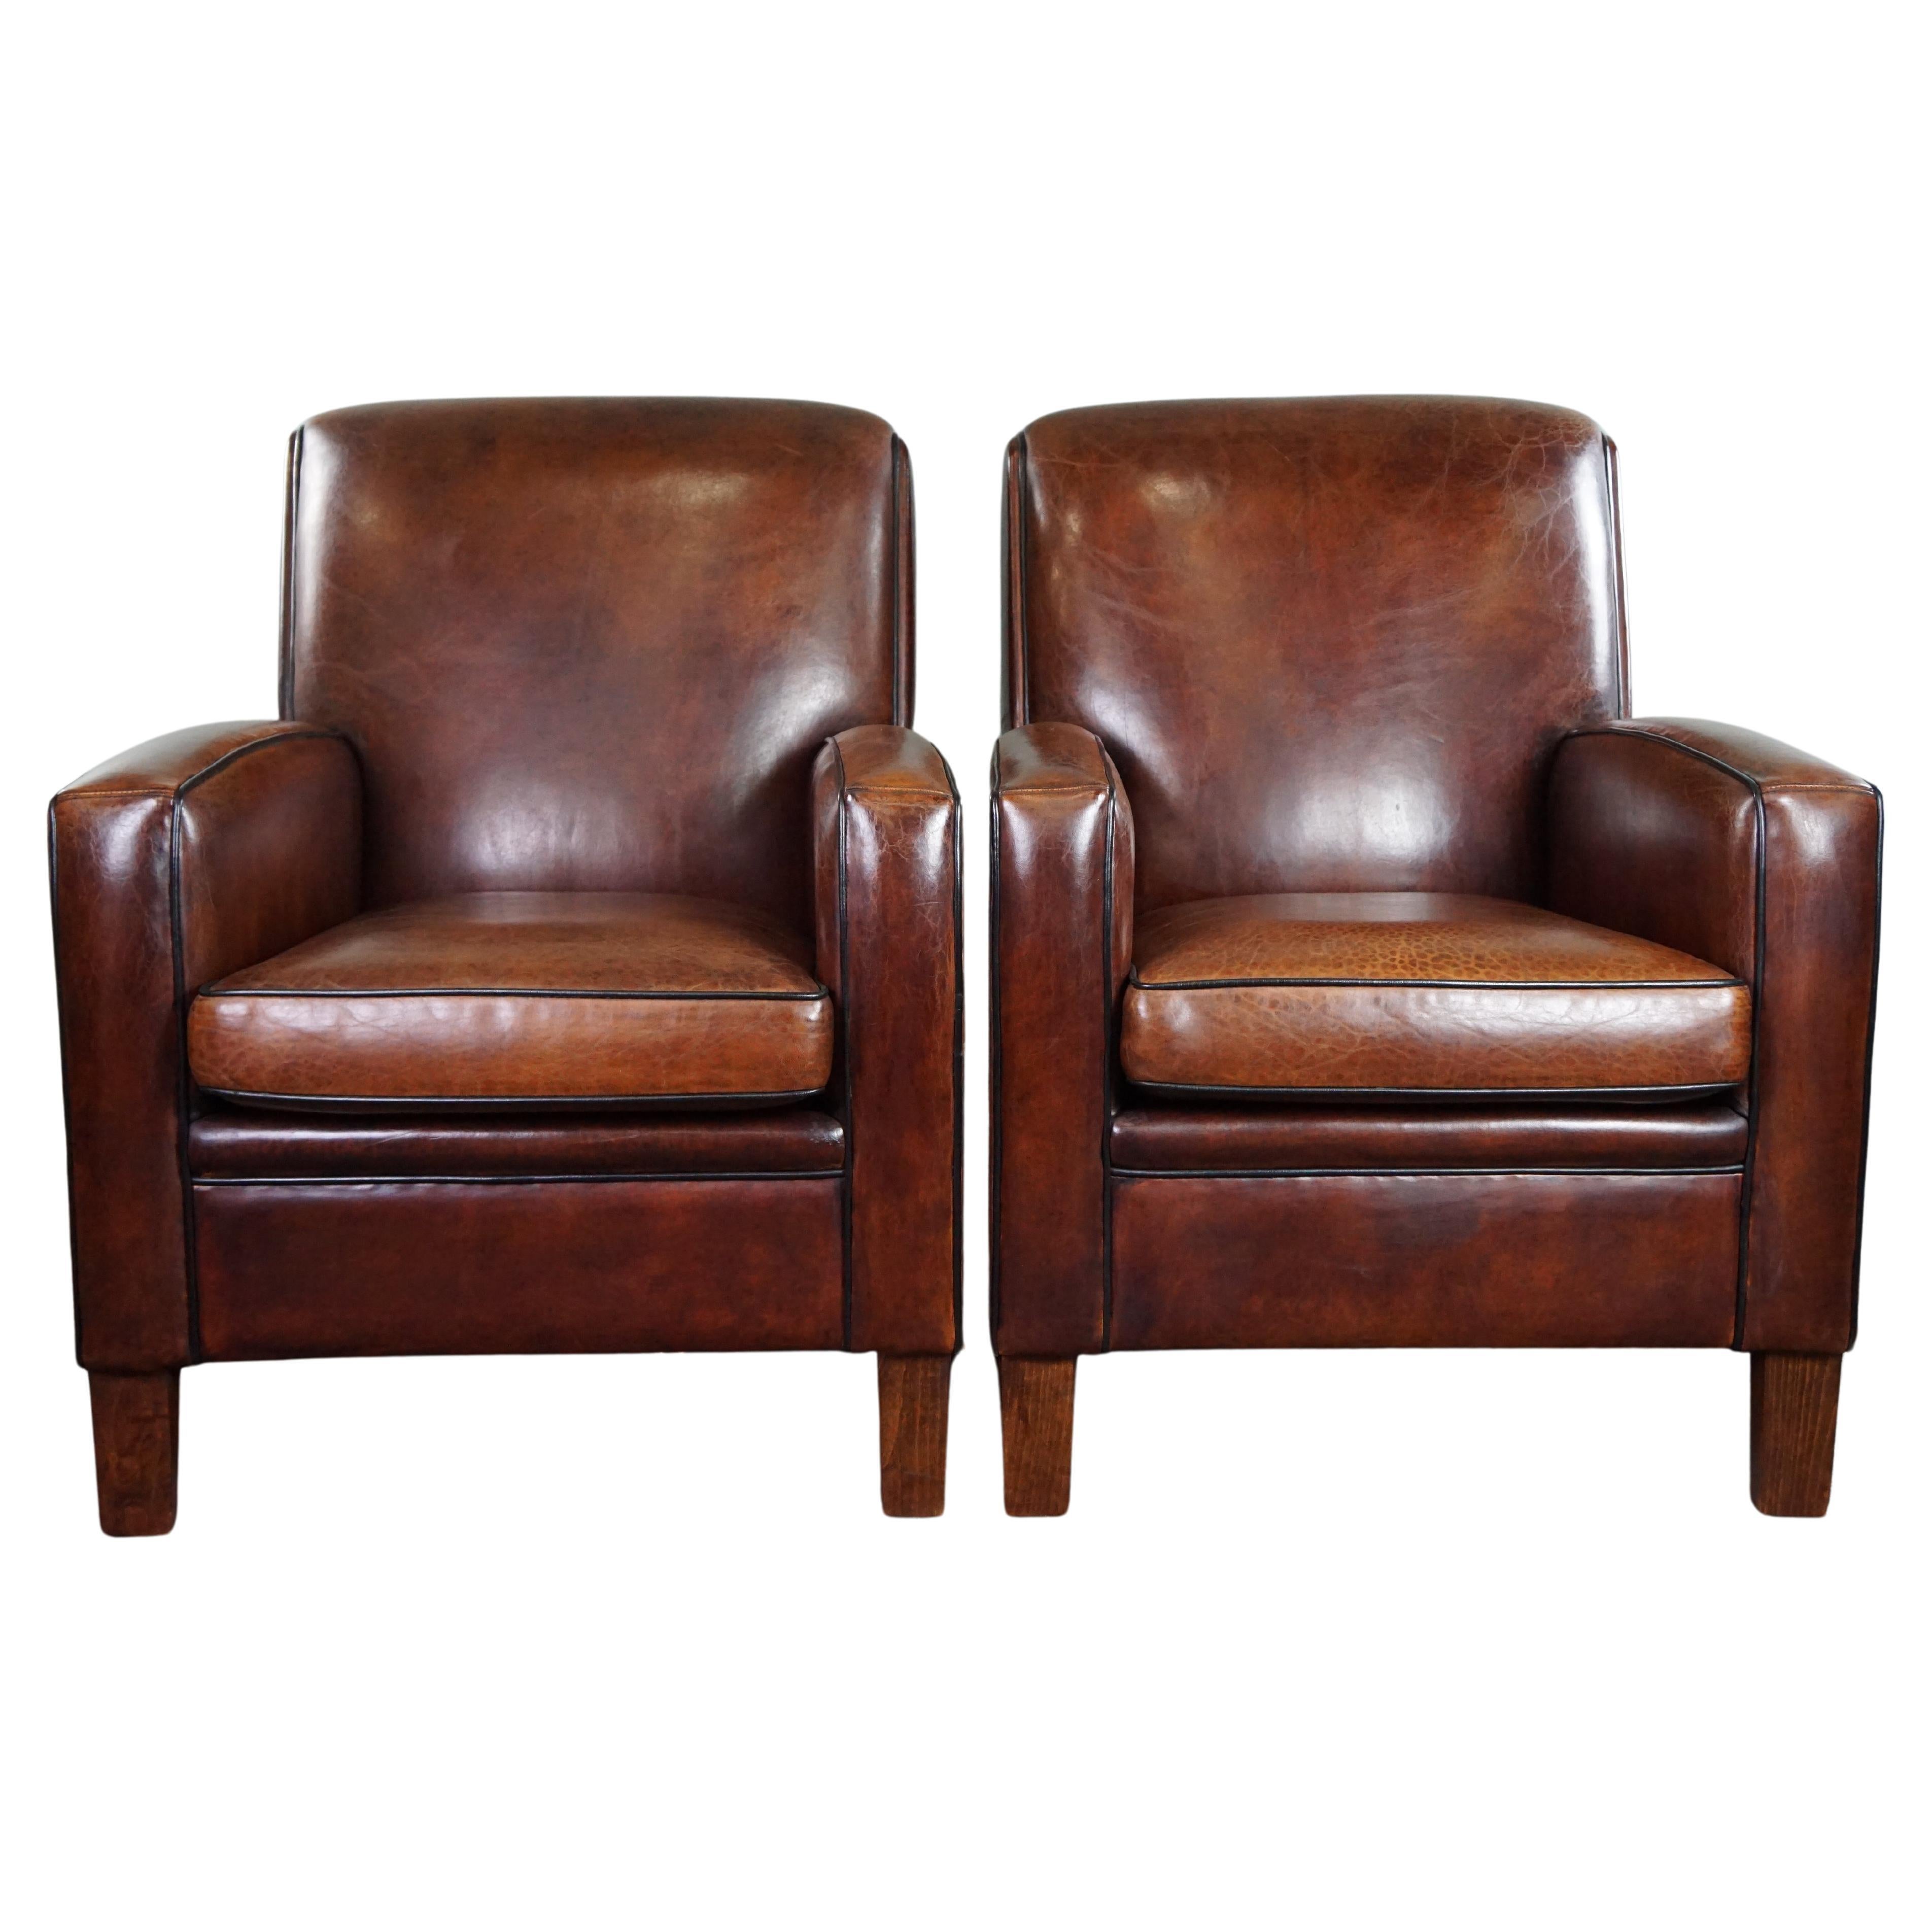 A very beautiful set of 2 Art Deco design armchairs in sheep leather